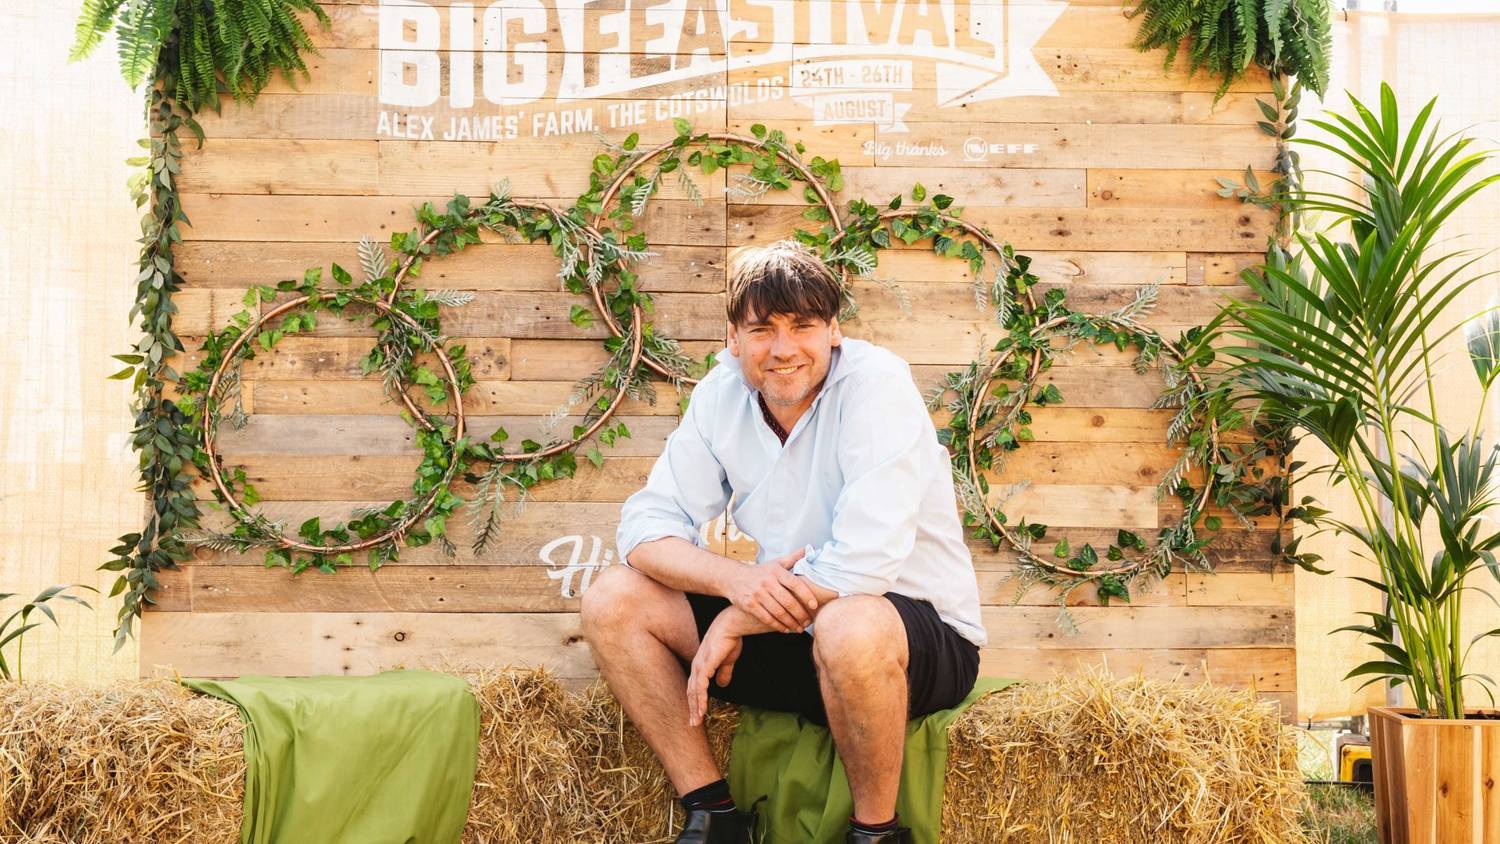 Top Big Feastival Camping Tips from Alex James and friends